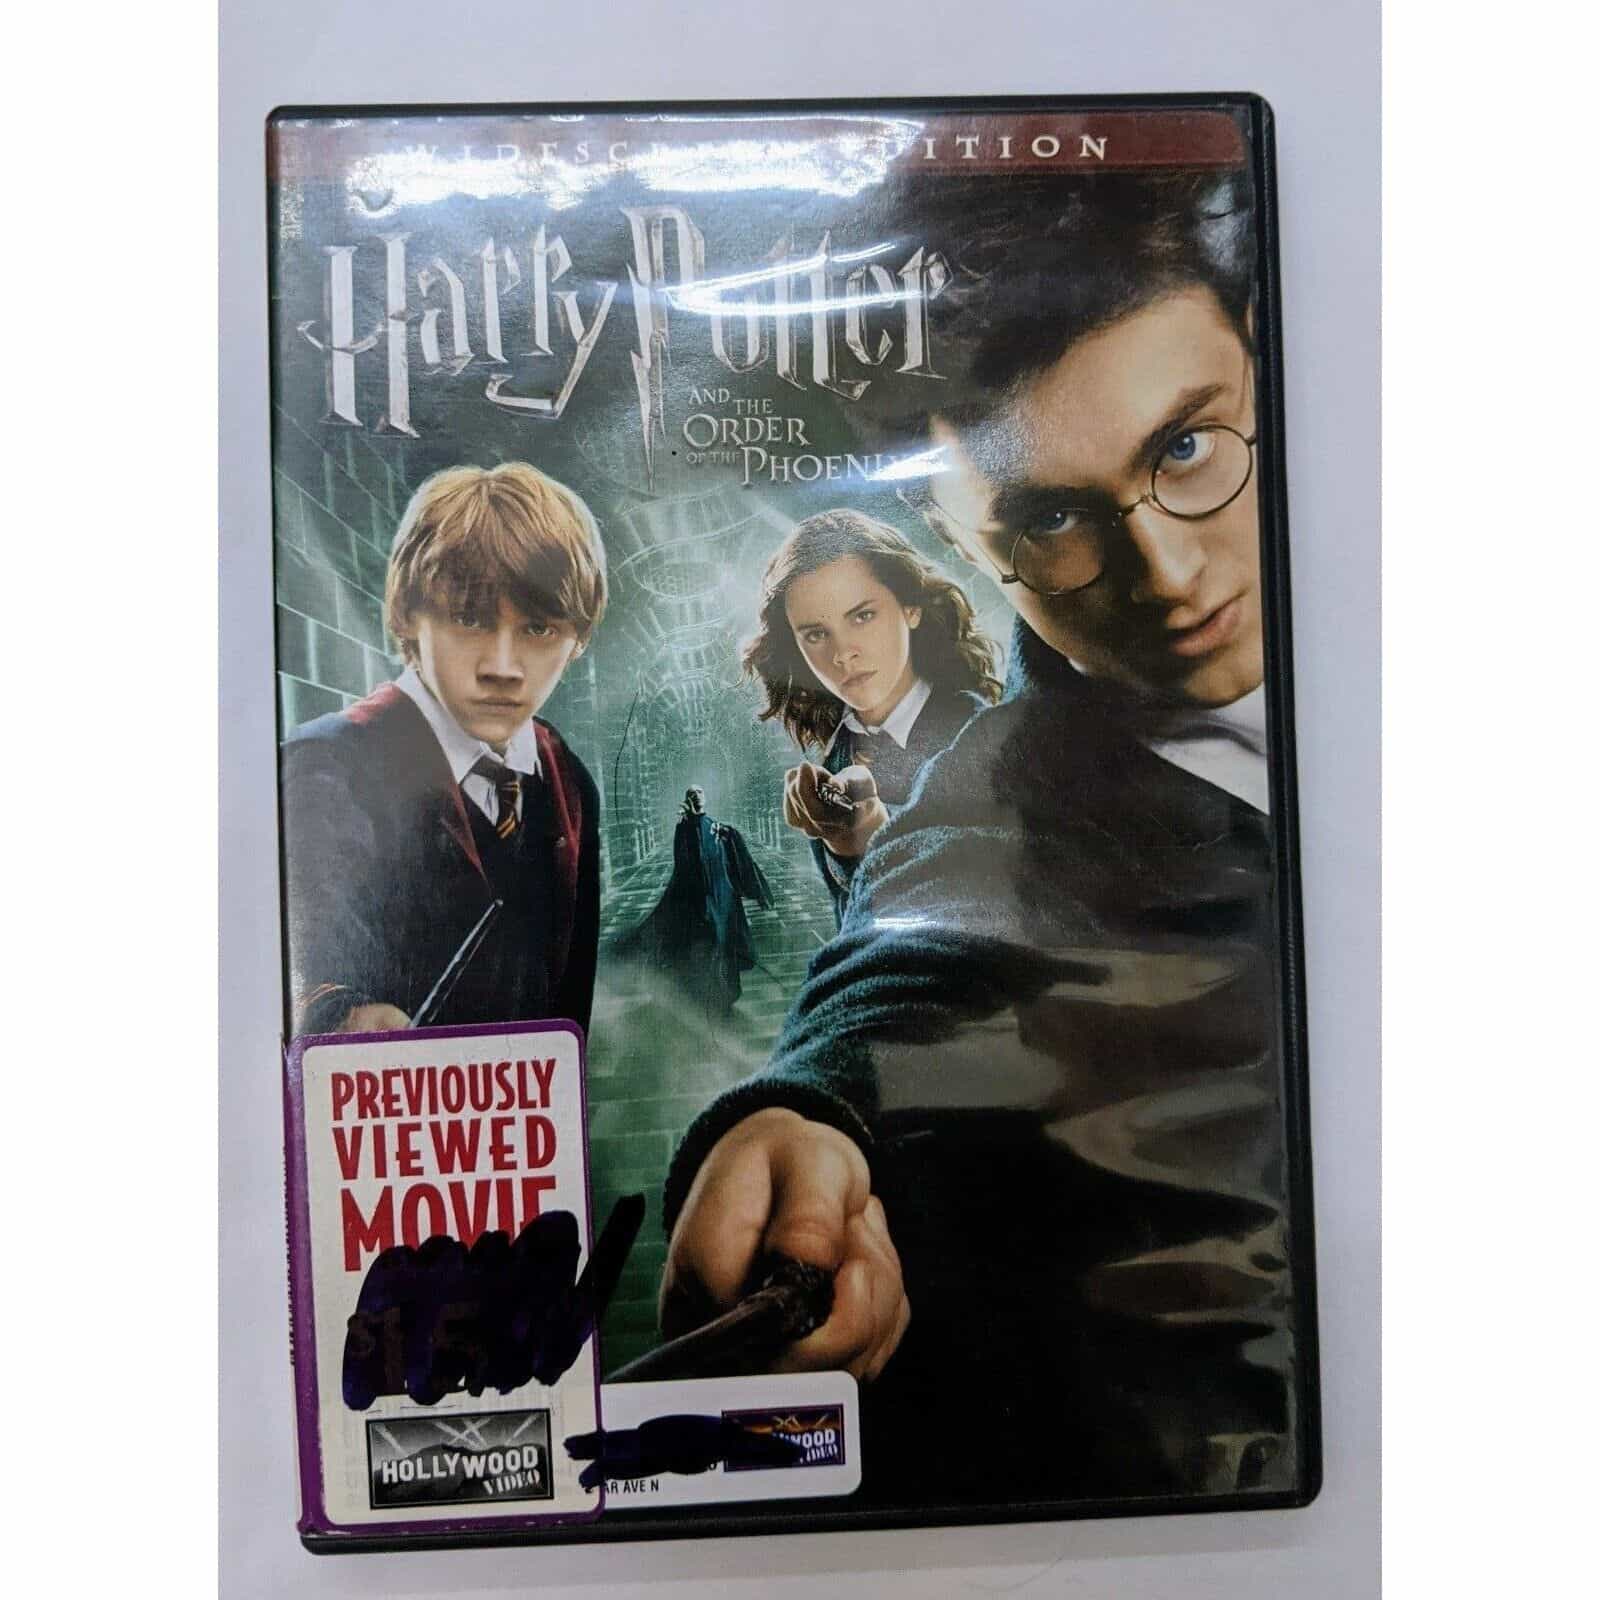 Harry Potter And The Order Of The Phoenix DVD movie